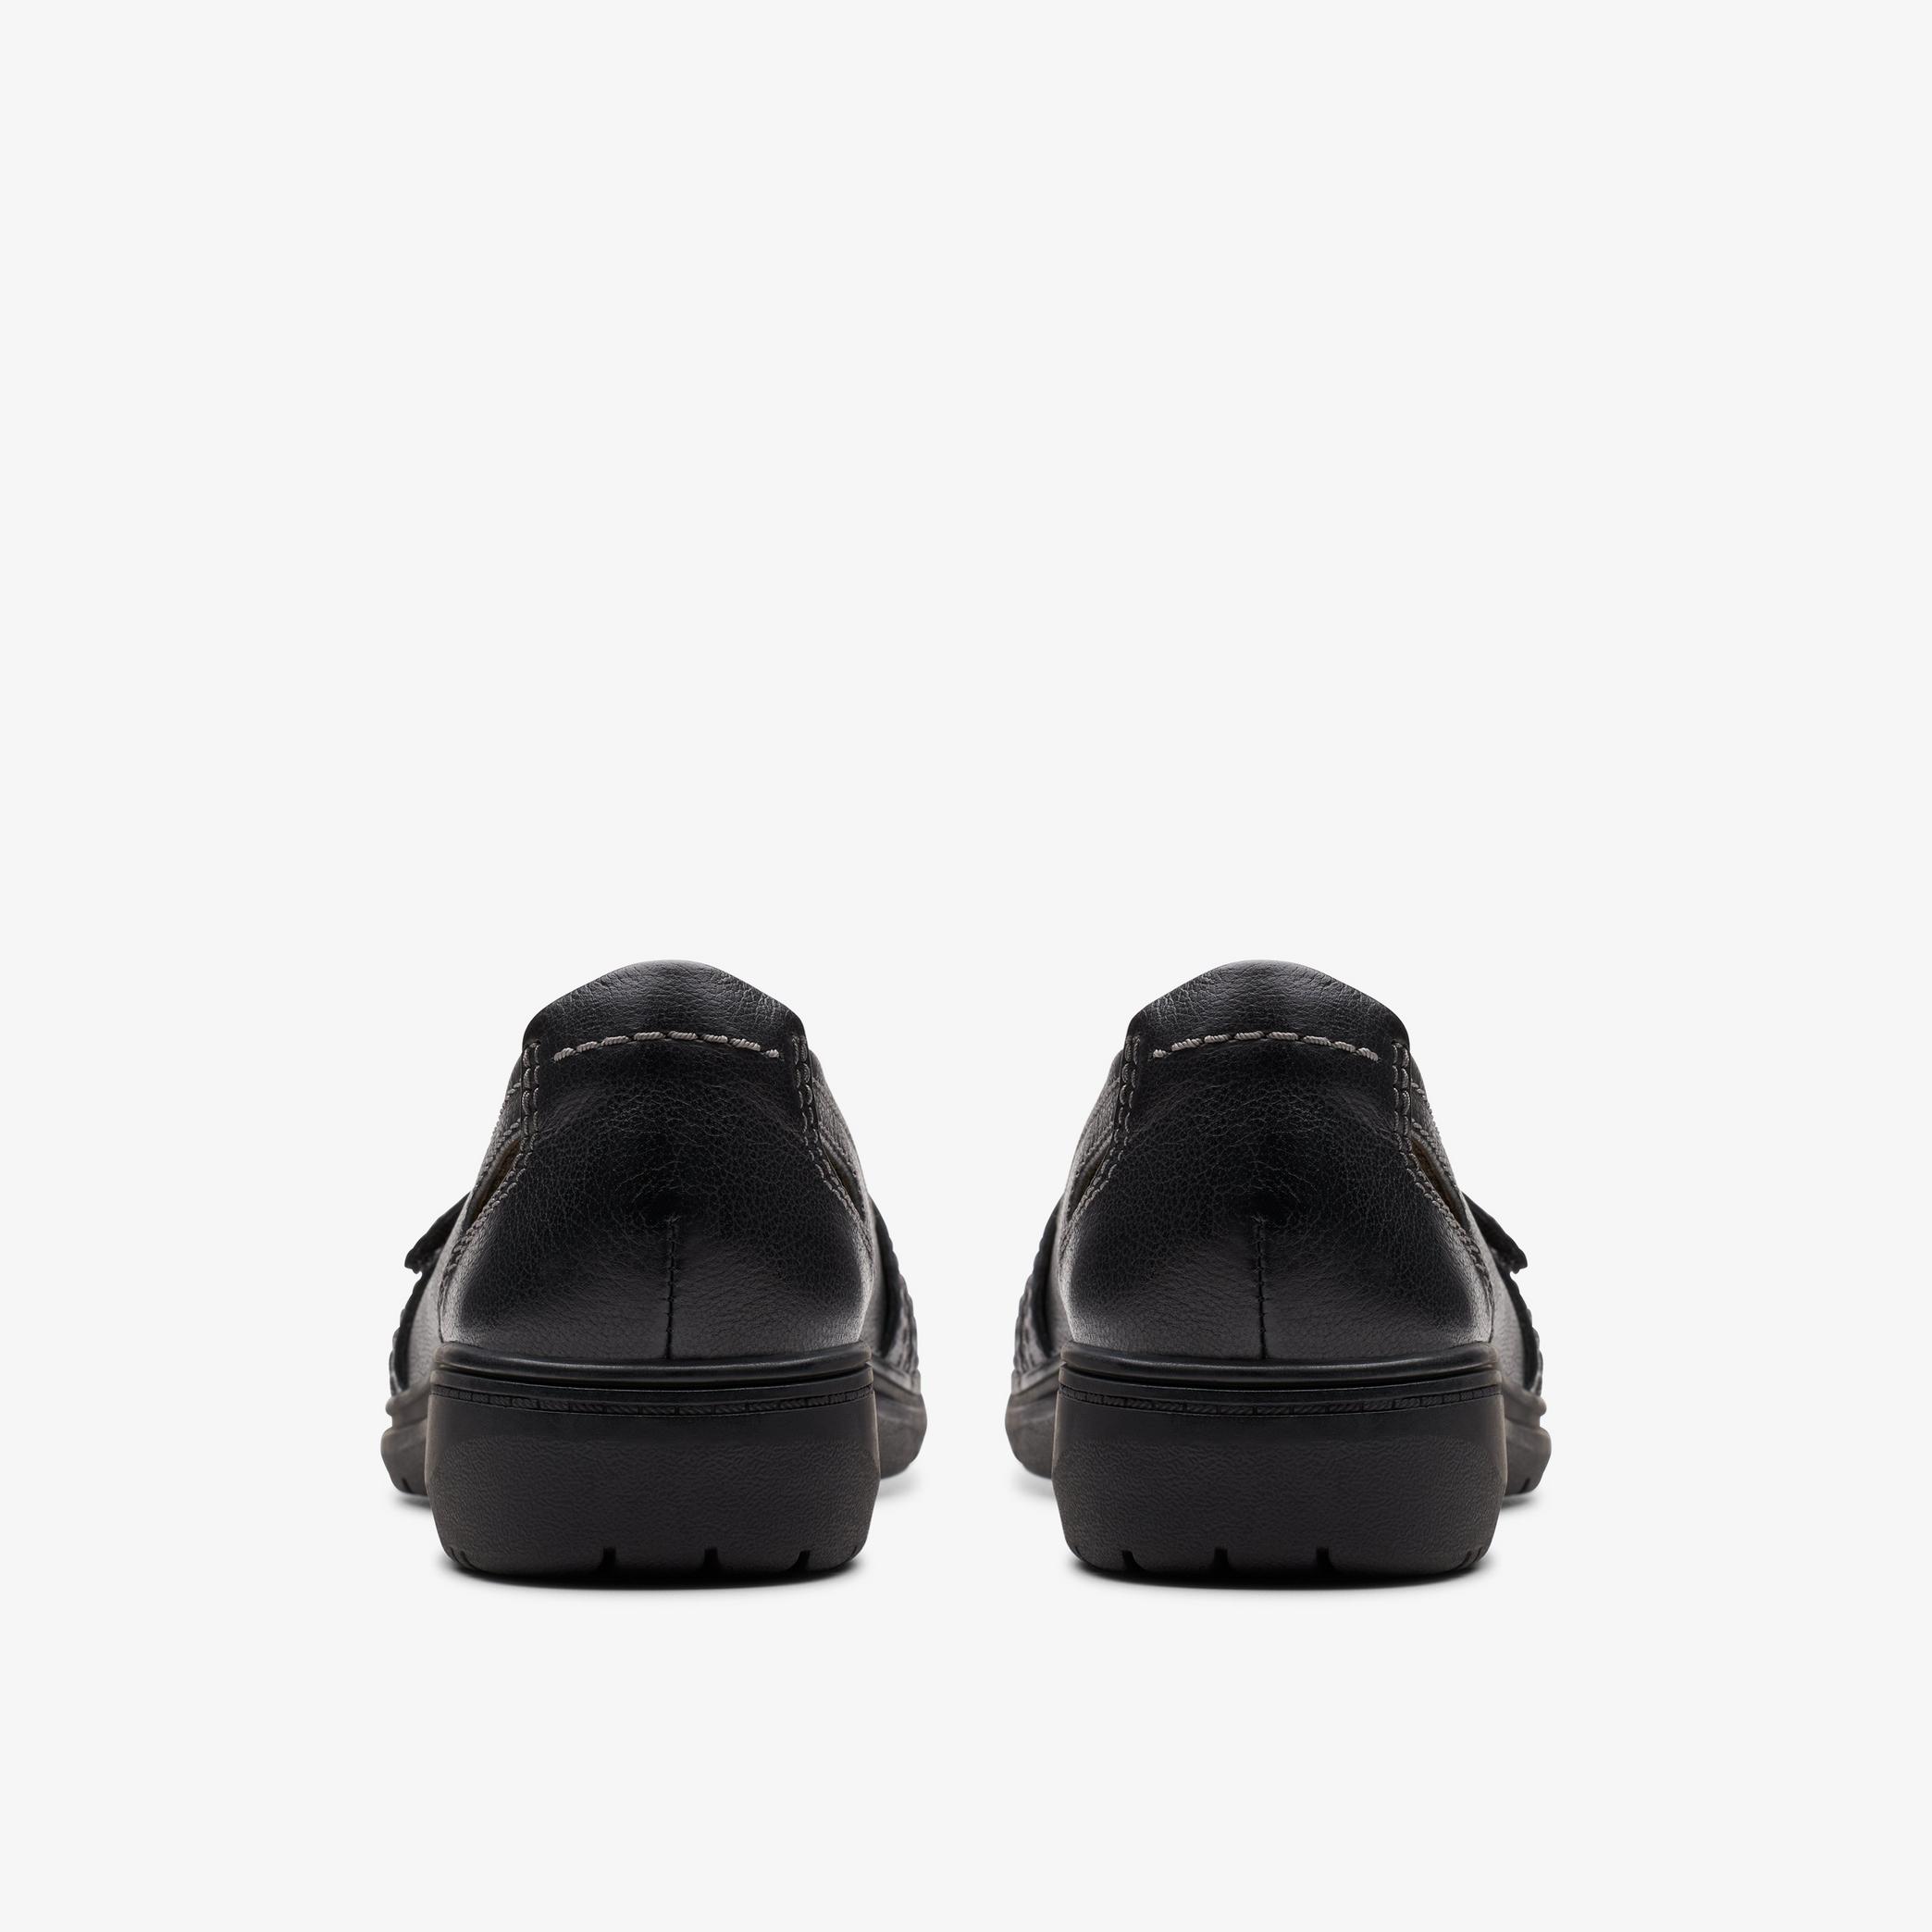 Carleigh Eliza Black Leather Slip Ons, view 5 of 6